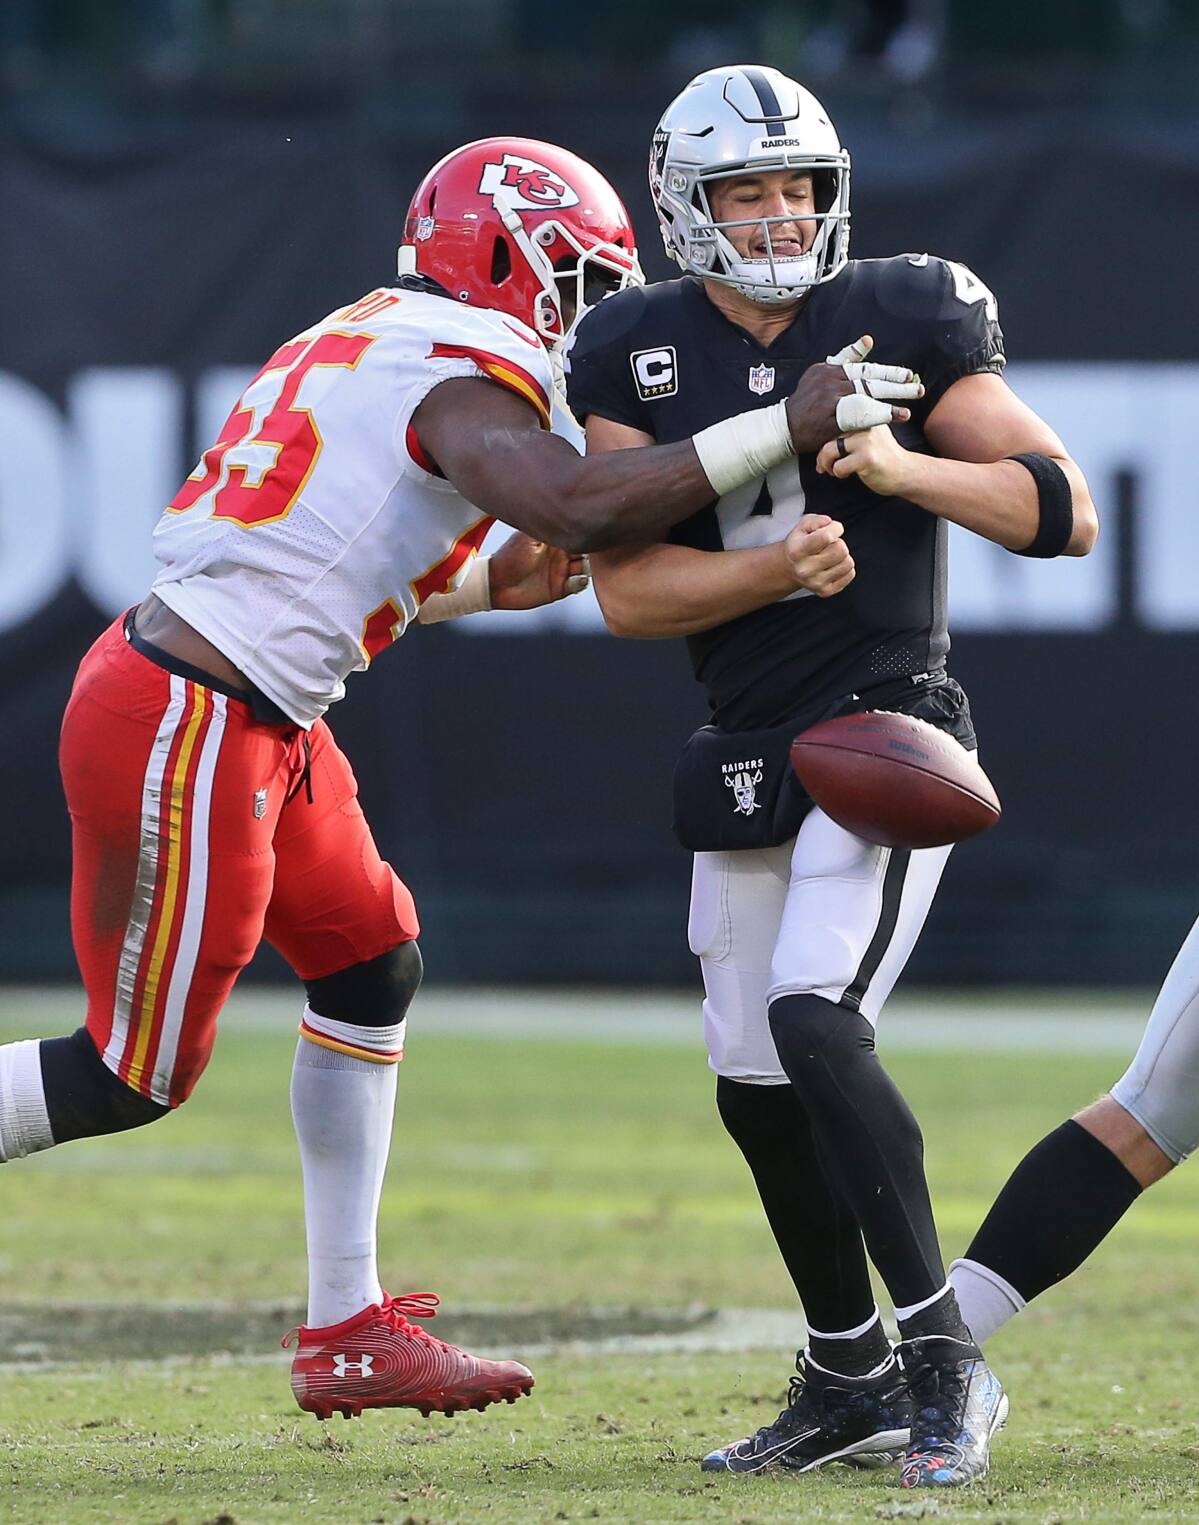 Raiders lineman finds scissors in the middle of field vs. Chiefs